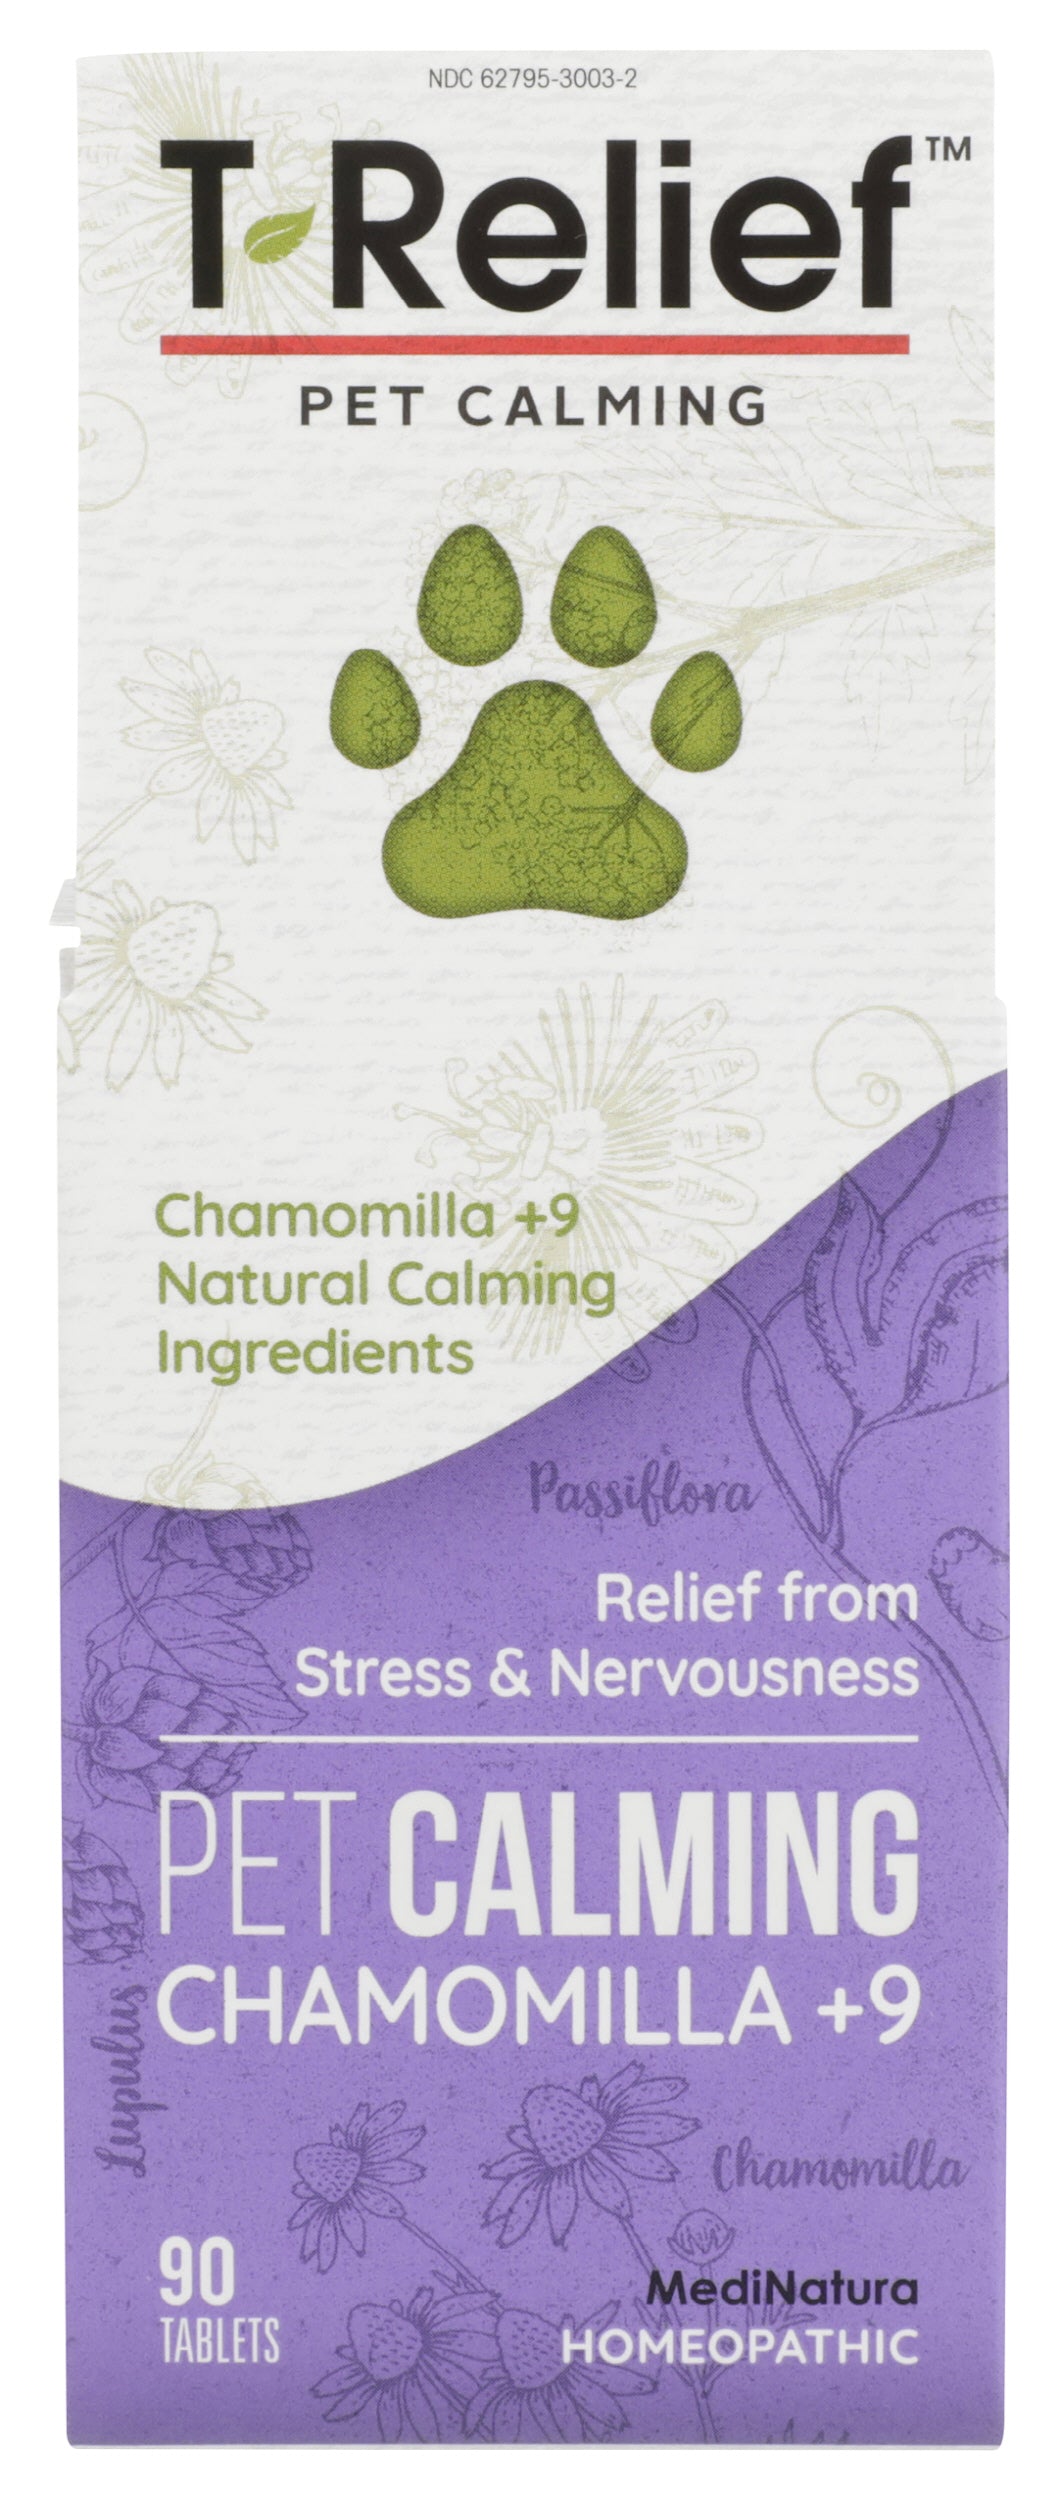 T-Relief Pet Calming Chamomilla +9 90 Tablets